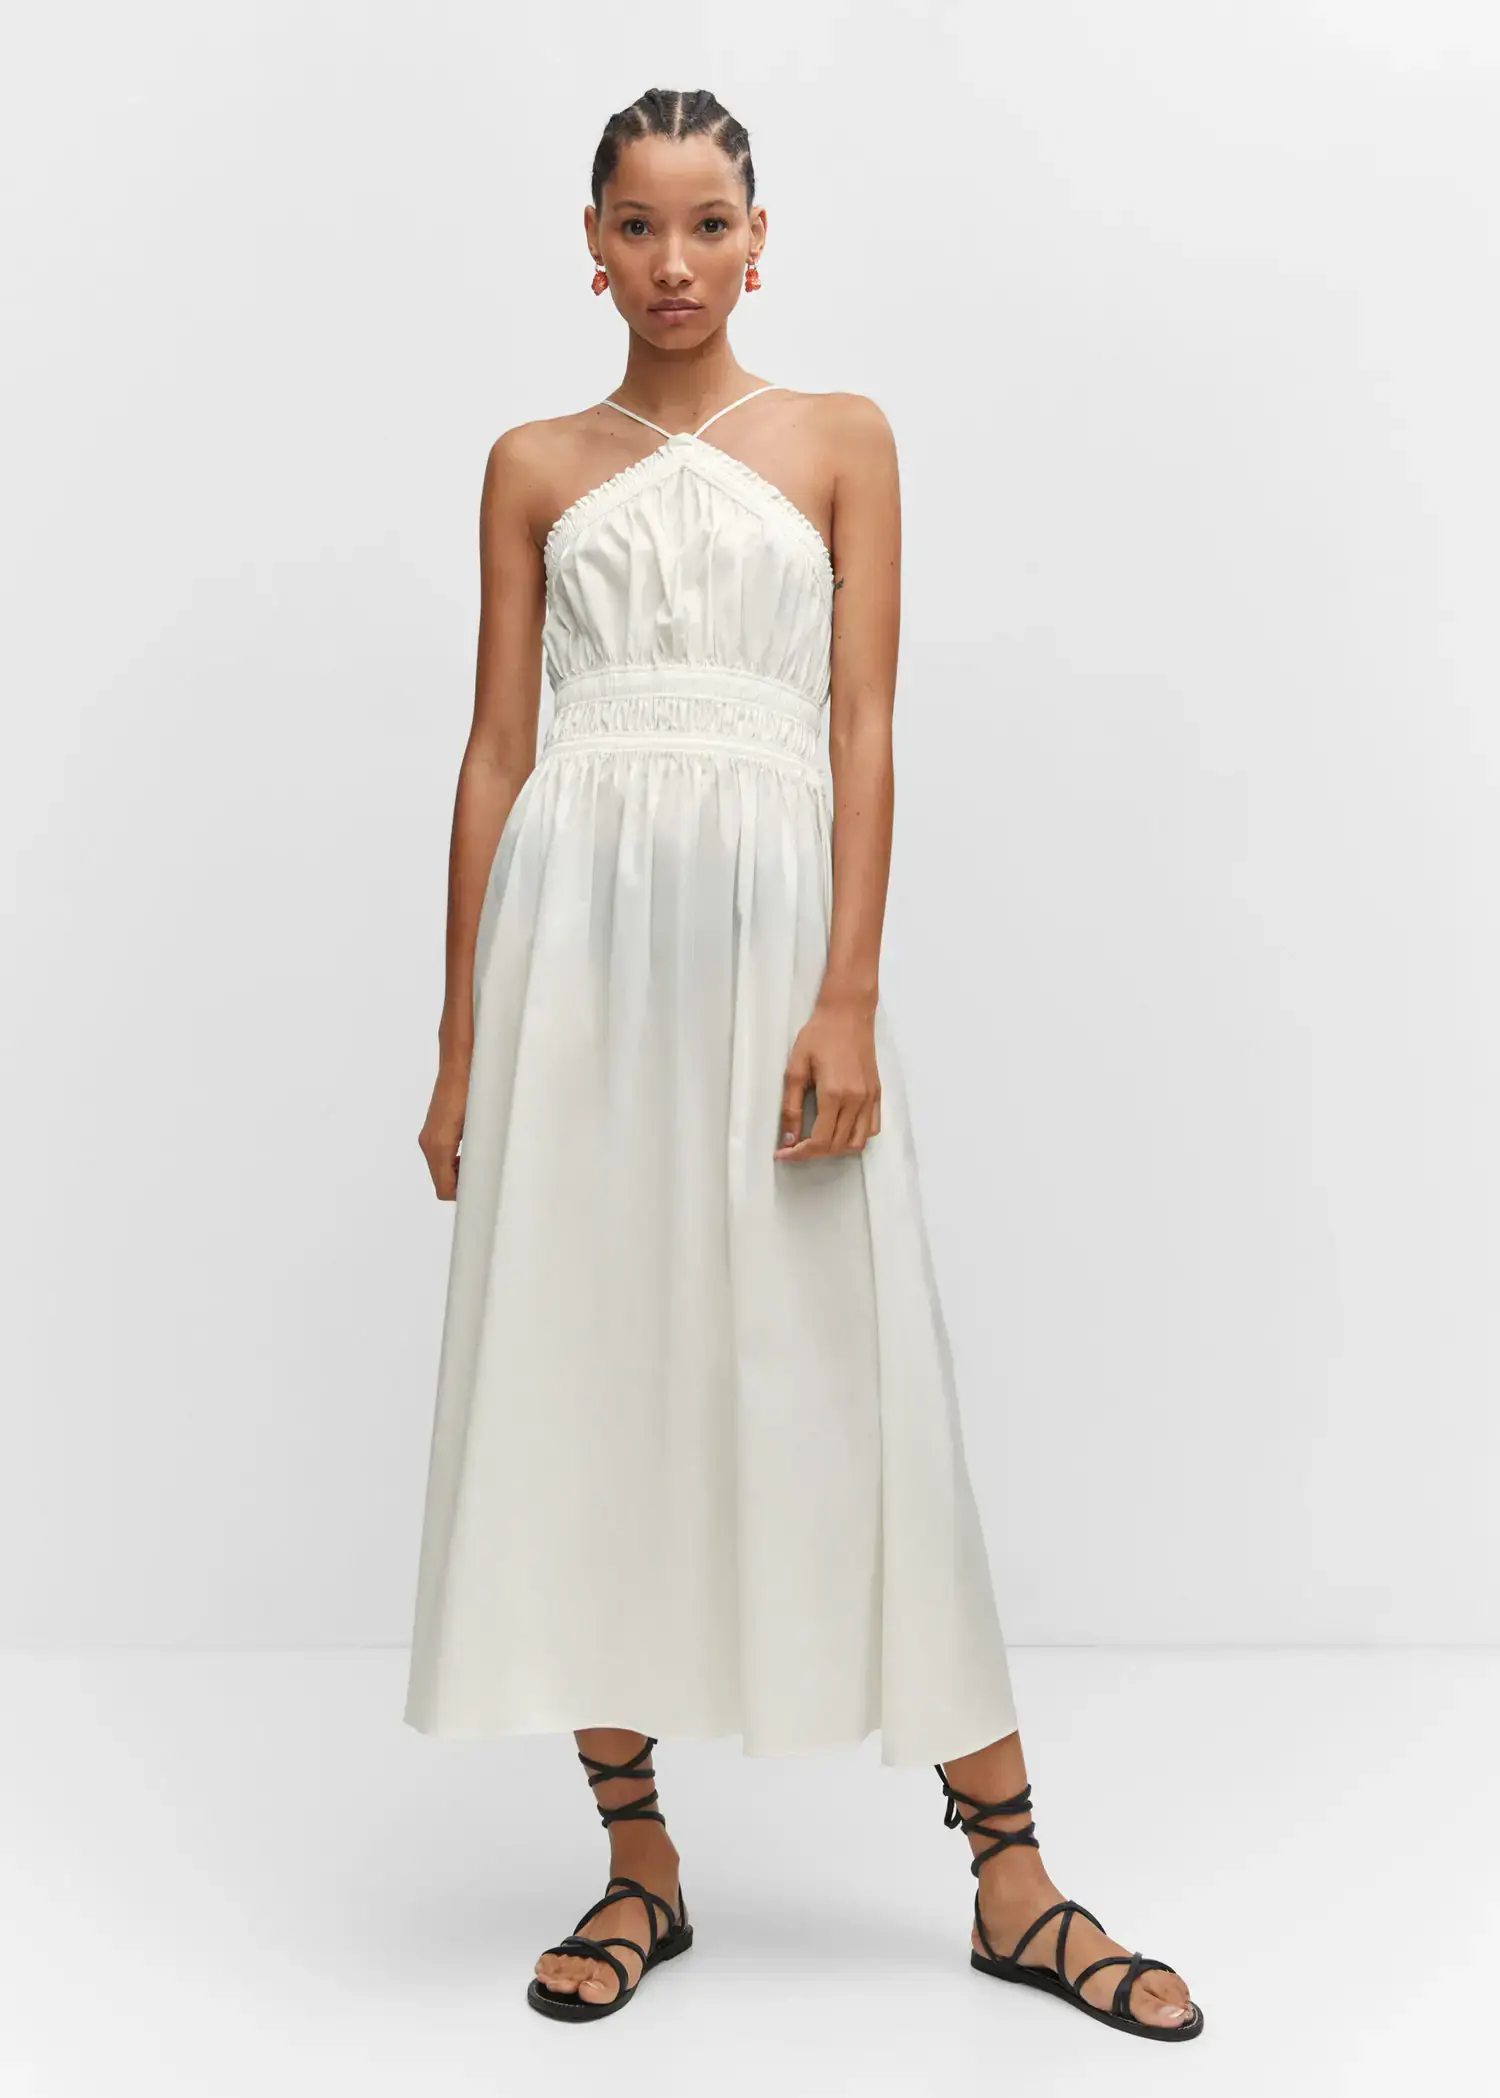 Mango Halter-neck dress with ruffle details. a woman wearing a white dress standing in a room. 